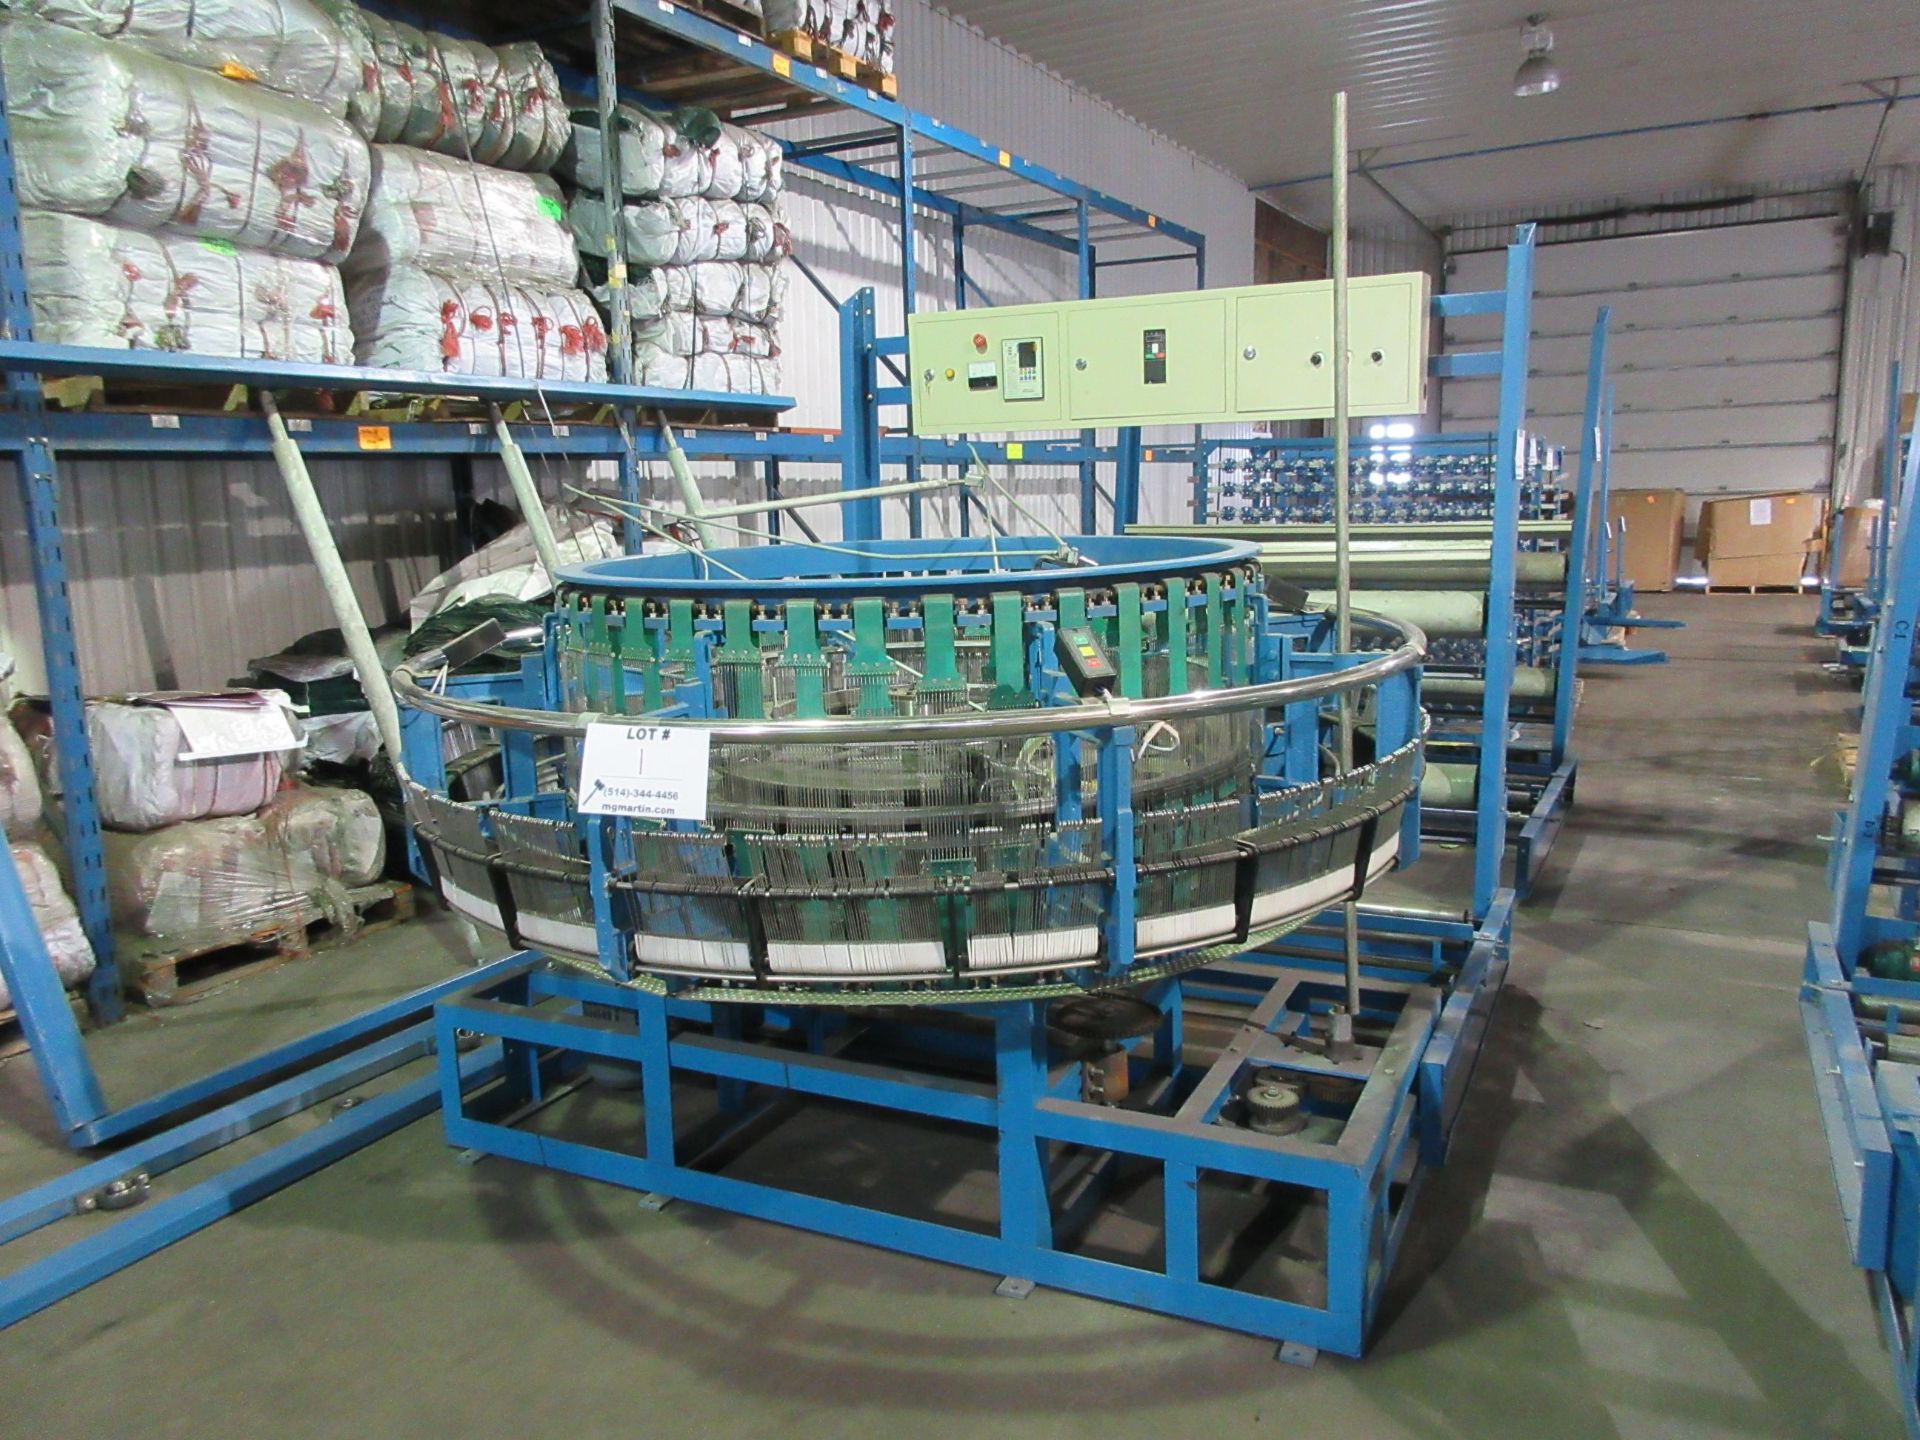 Weaving machine for polypropylene bags w/t spool stands, etc.